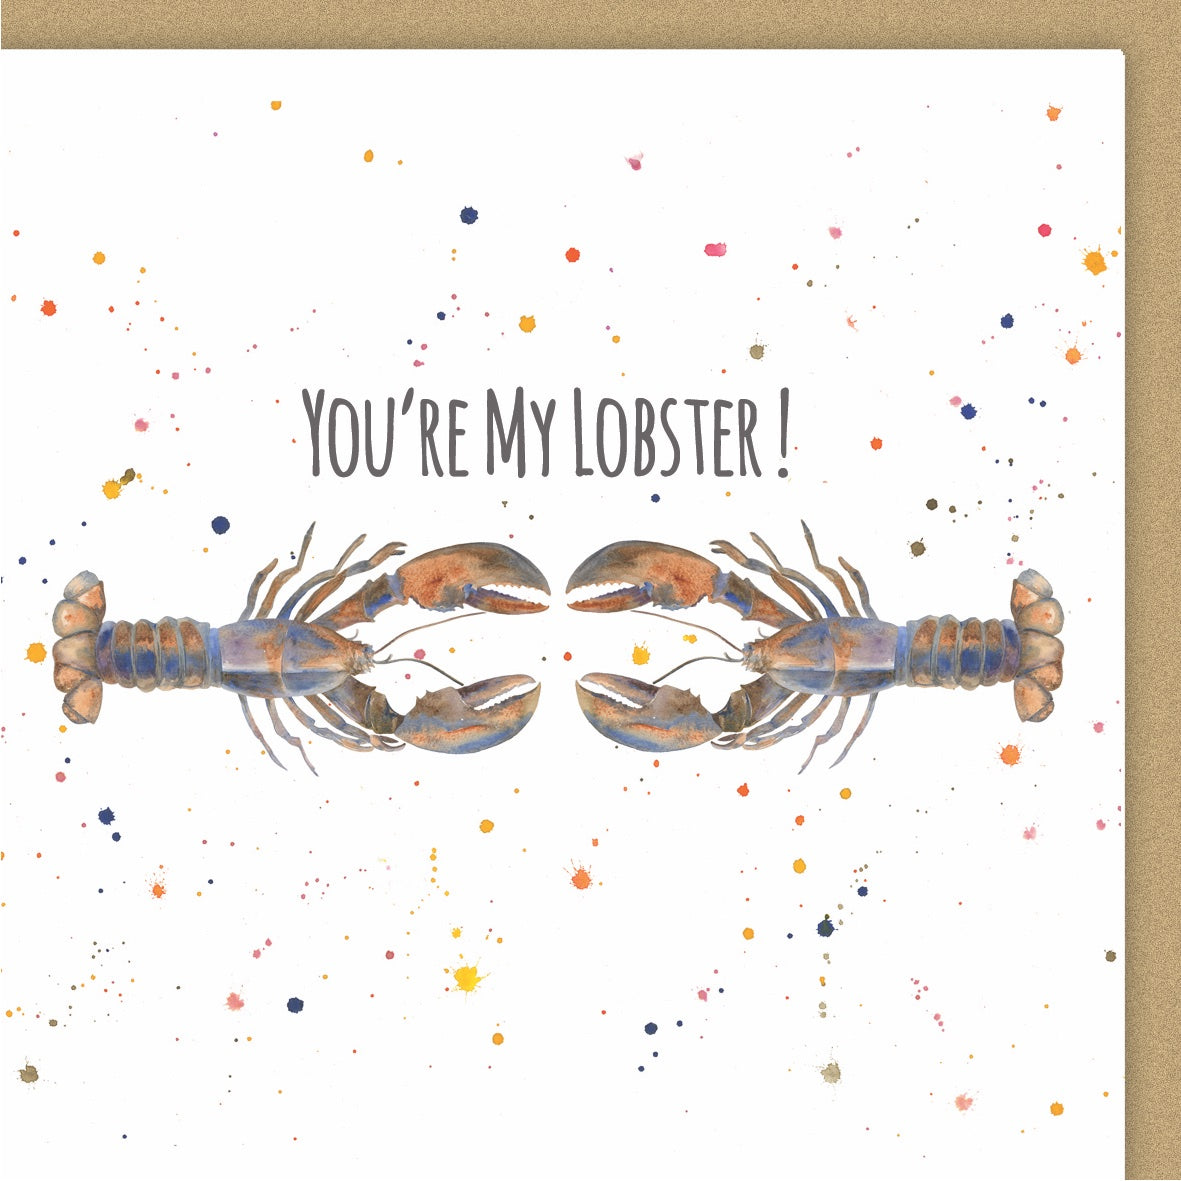 Lobster anniversary Valentine day Ceinwen Campbell The Arty Penguin